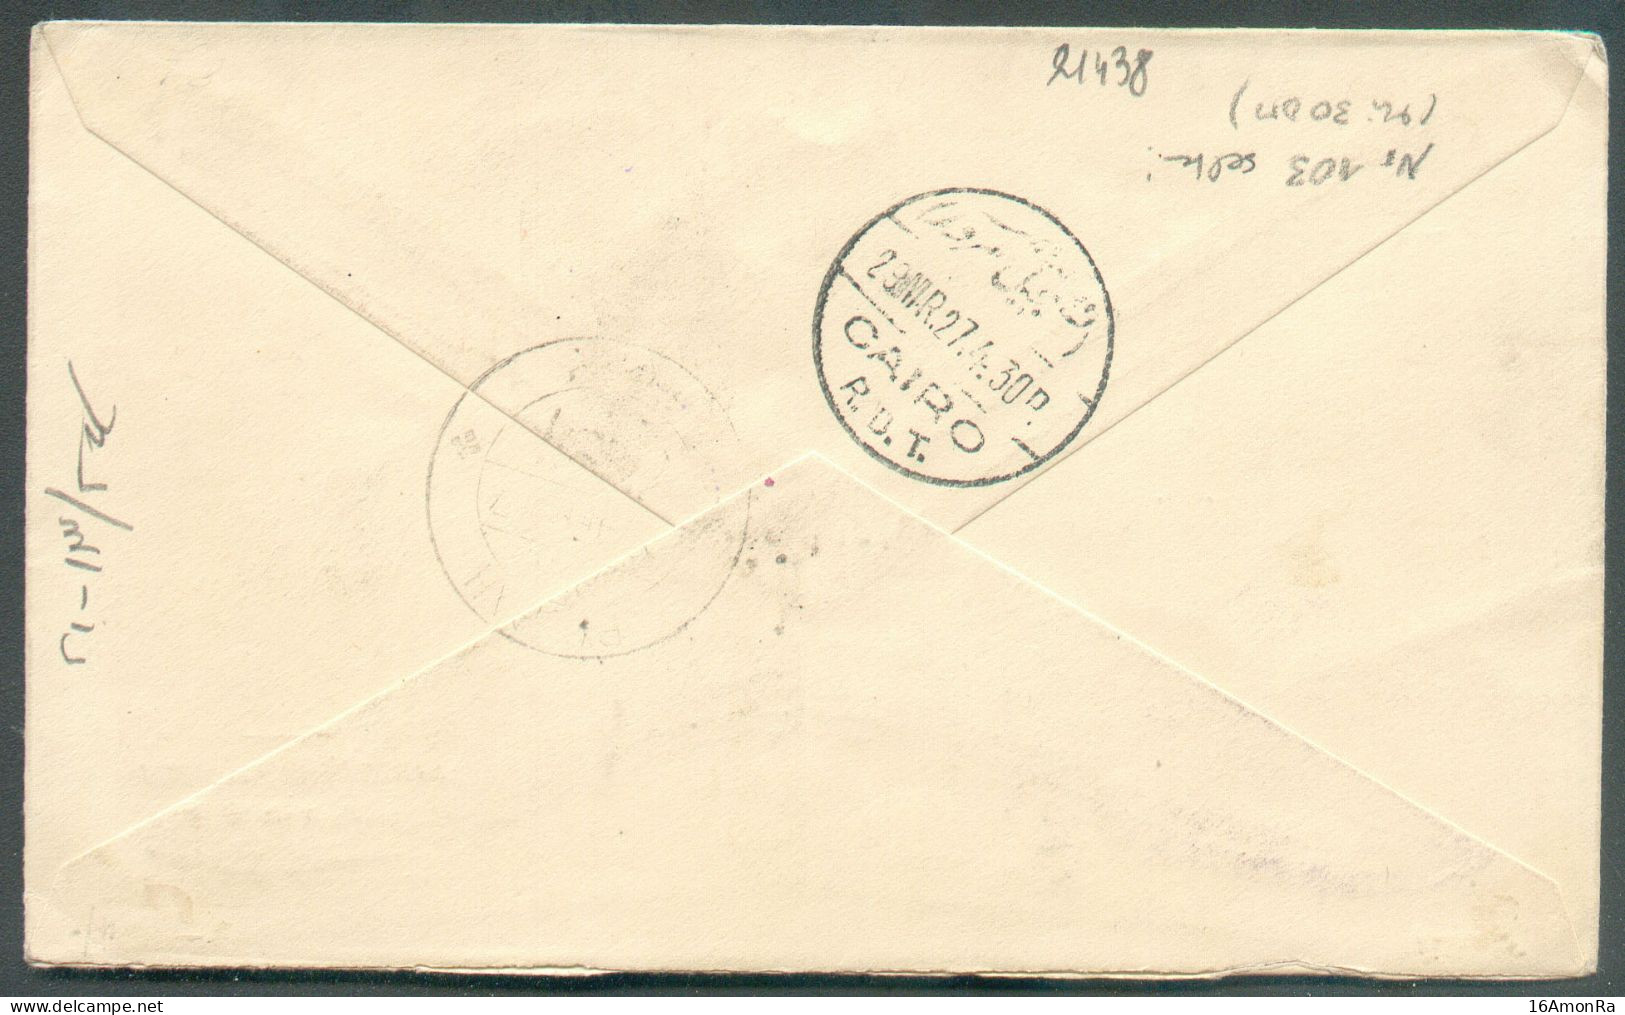 27pi PA. + Issue CONGRES INTERNATIONAL DU COTON 1927 Cacn. ALEXANDRIA On Regisetred Cover + Air Mail 29 March 1927 To Ba - Luftpost